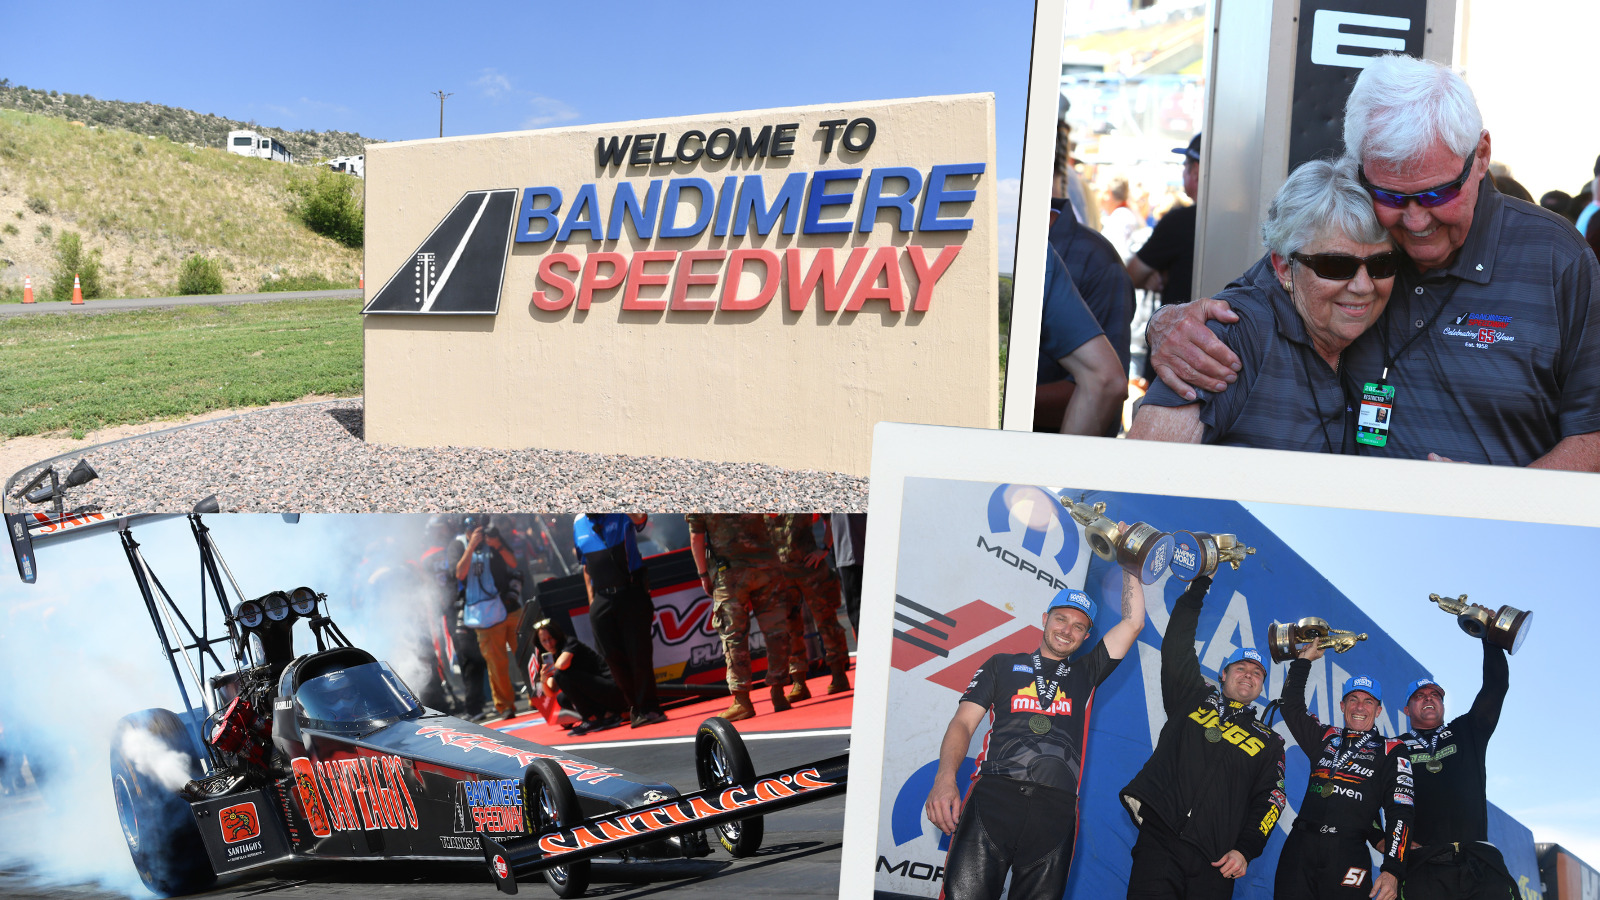 Know Before You Go - Bandimere Speedway